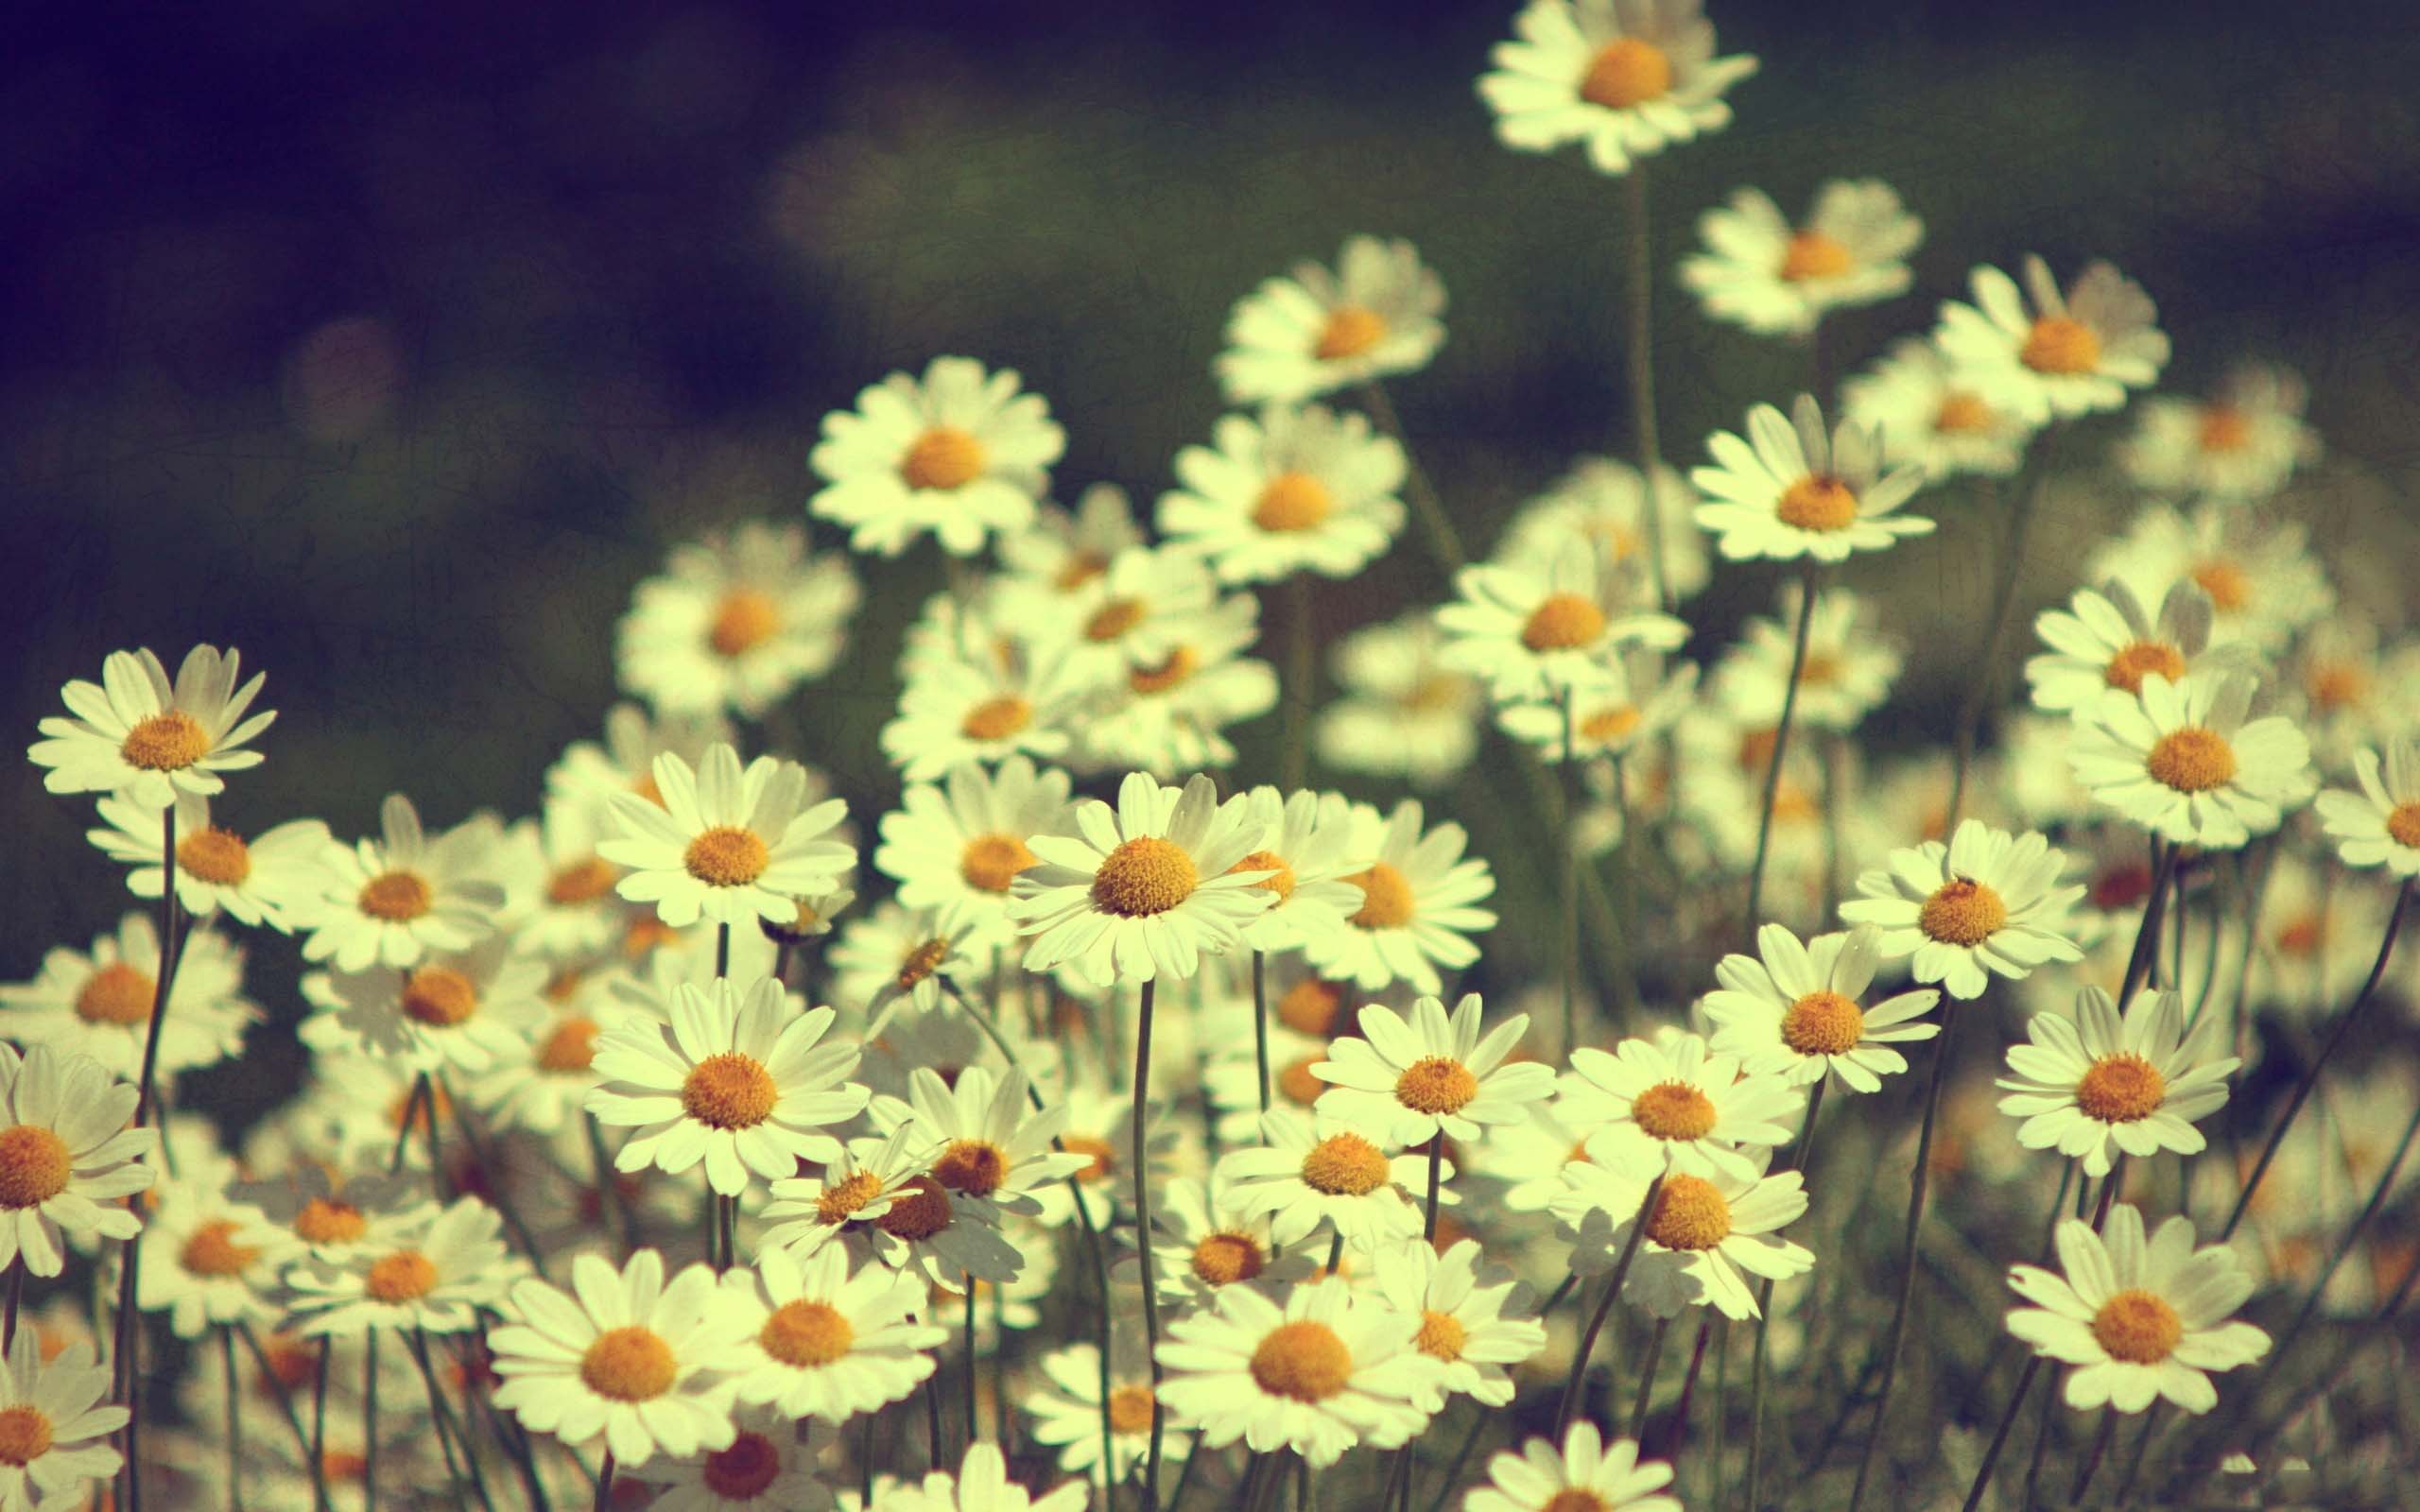 birthday and wedding flower of daisies images free